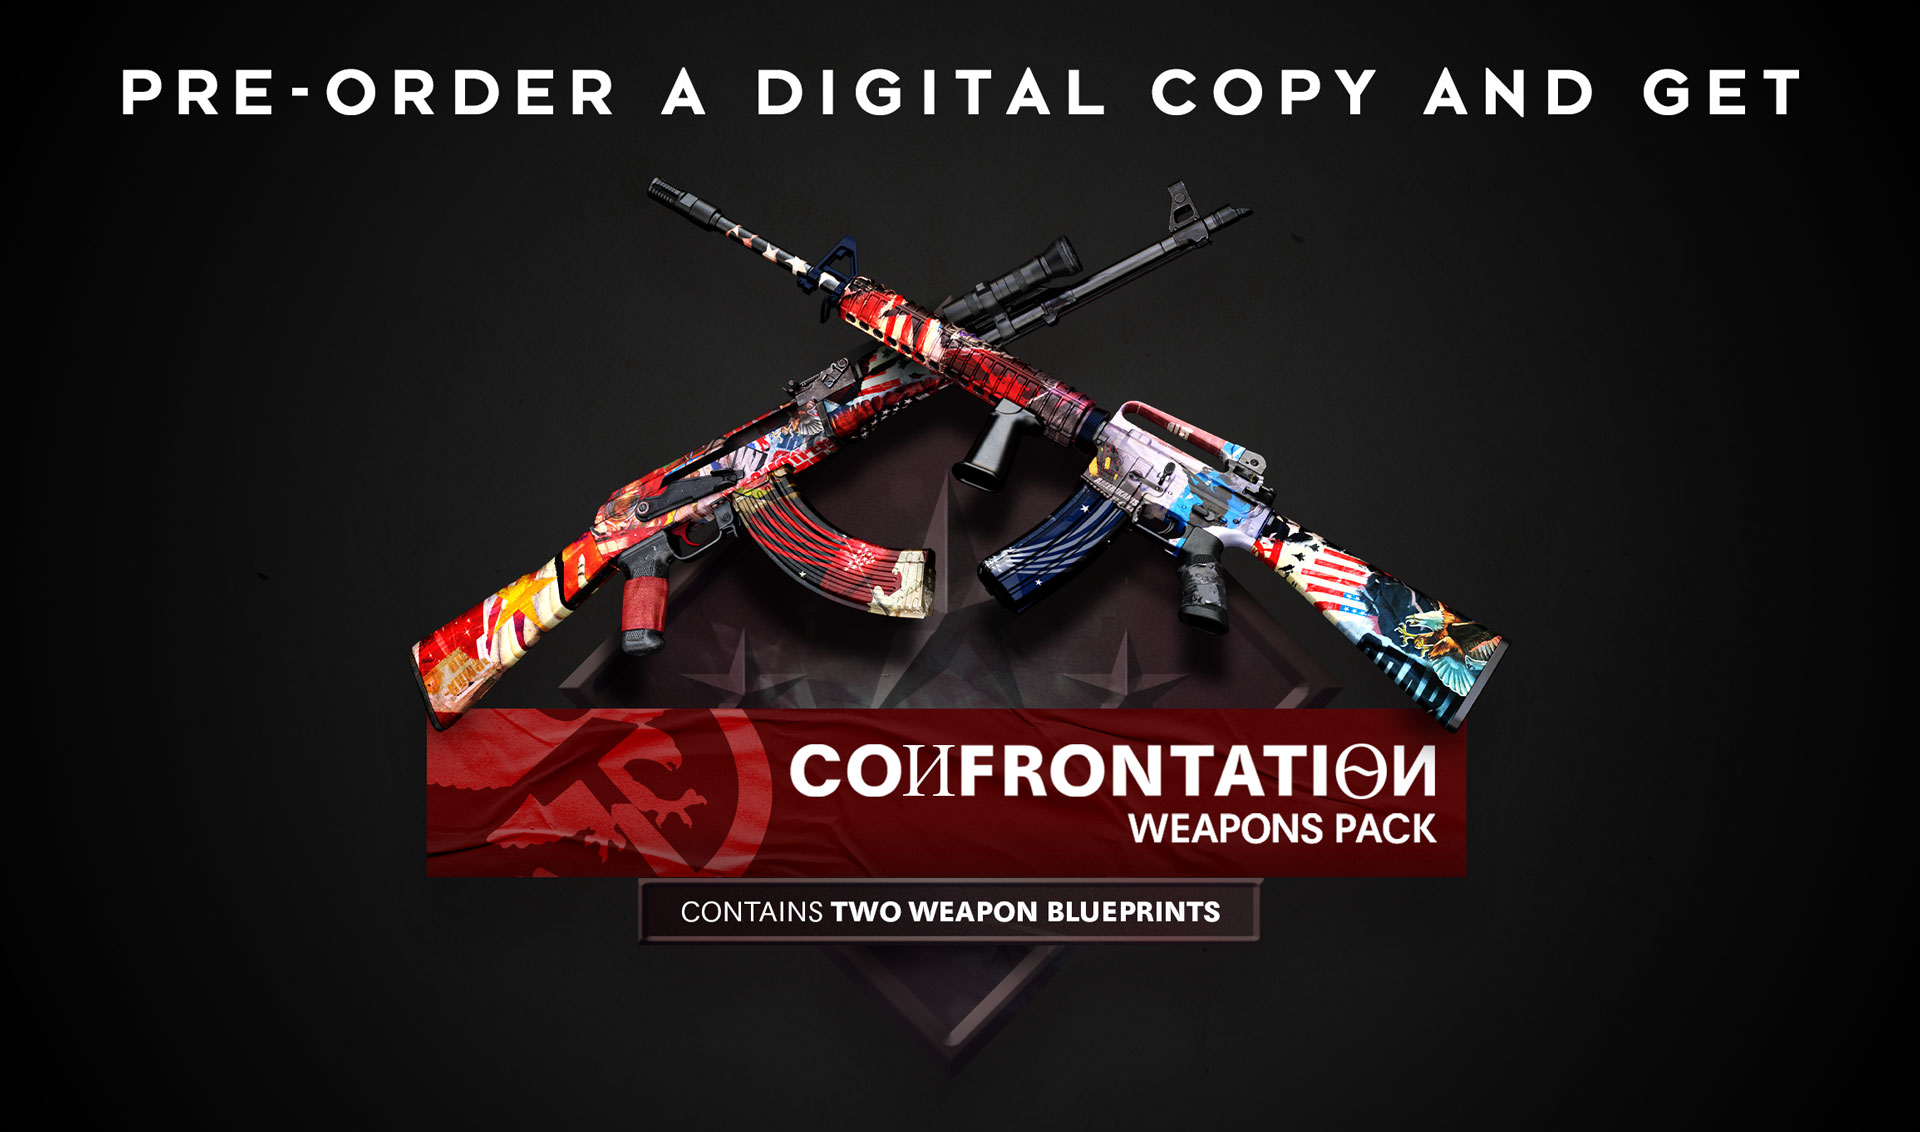 Call Of Duty Black Ops Cold War Pre Loading File Size And Confrontation Weapon Pack Details